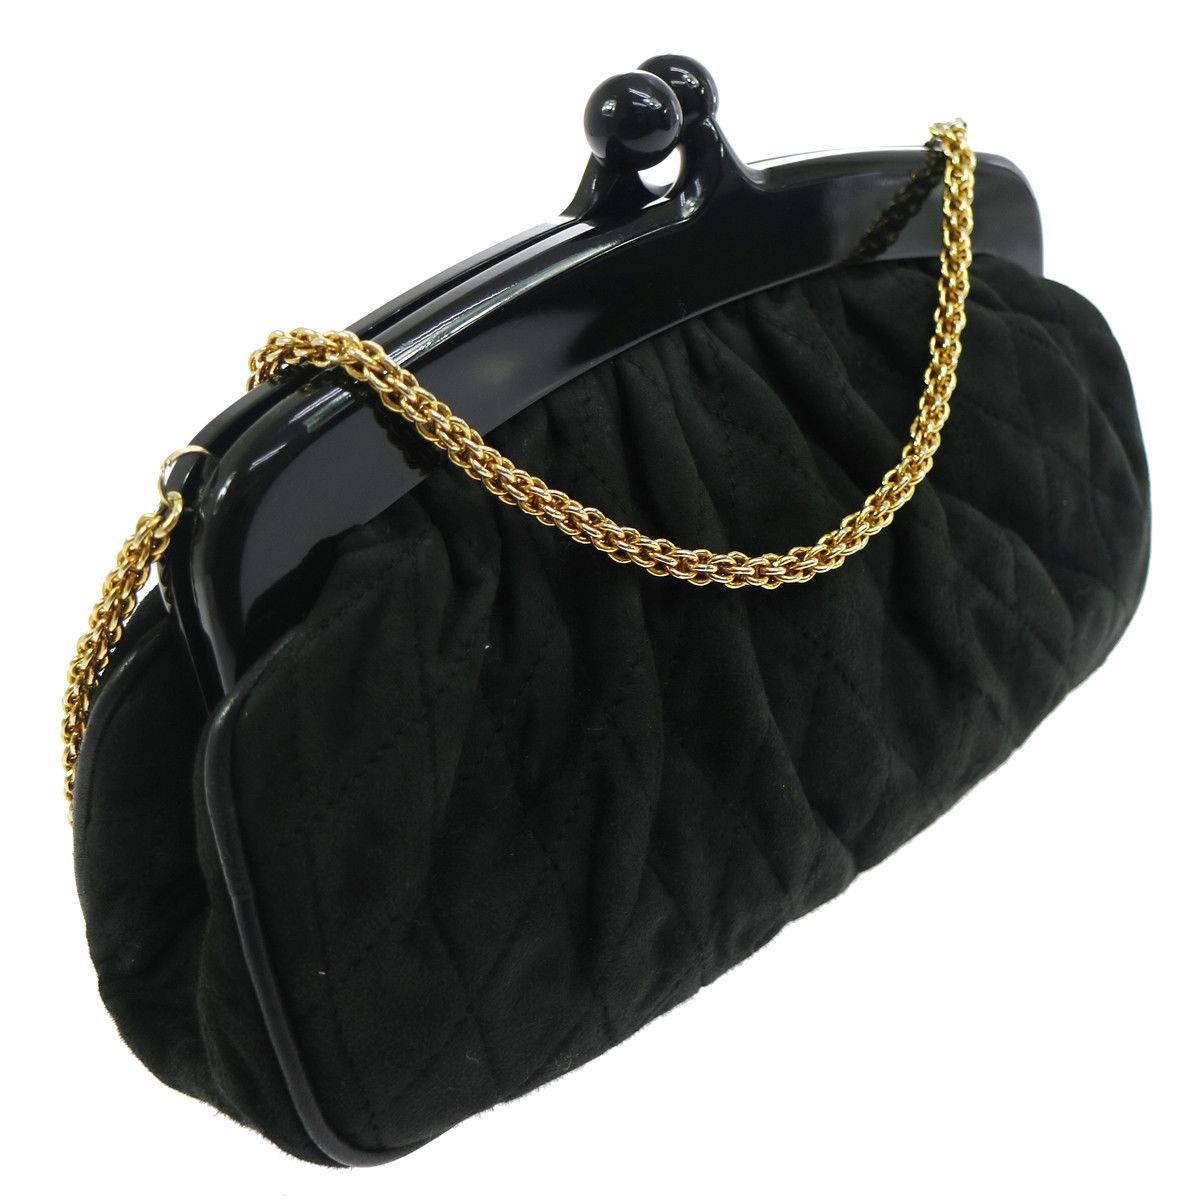 Chanel Black Suede KissLock Party 2 in 1 Clutch Evening Shoulder Bag in Box 1